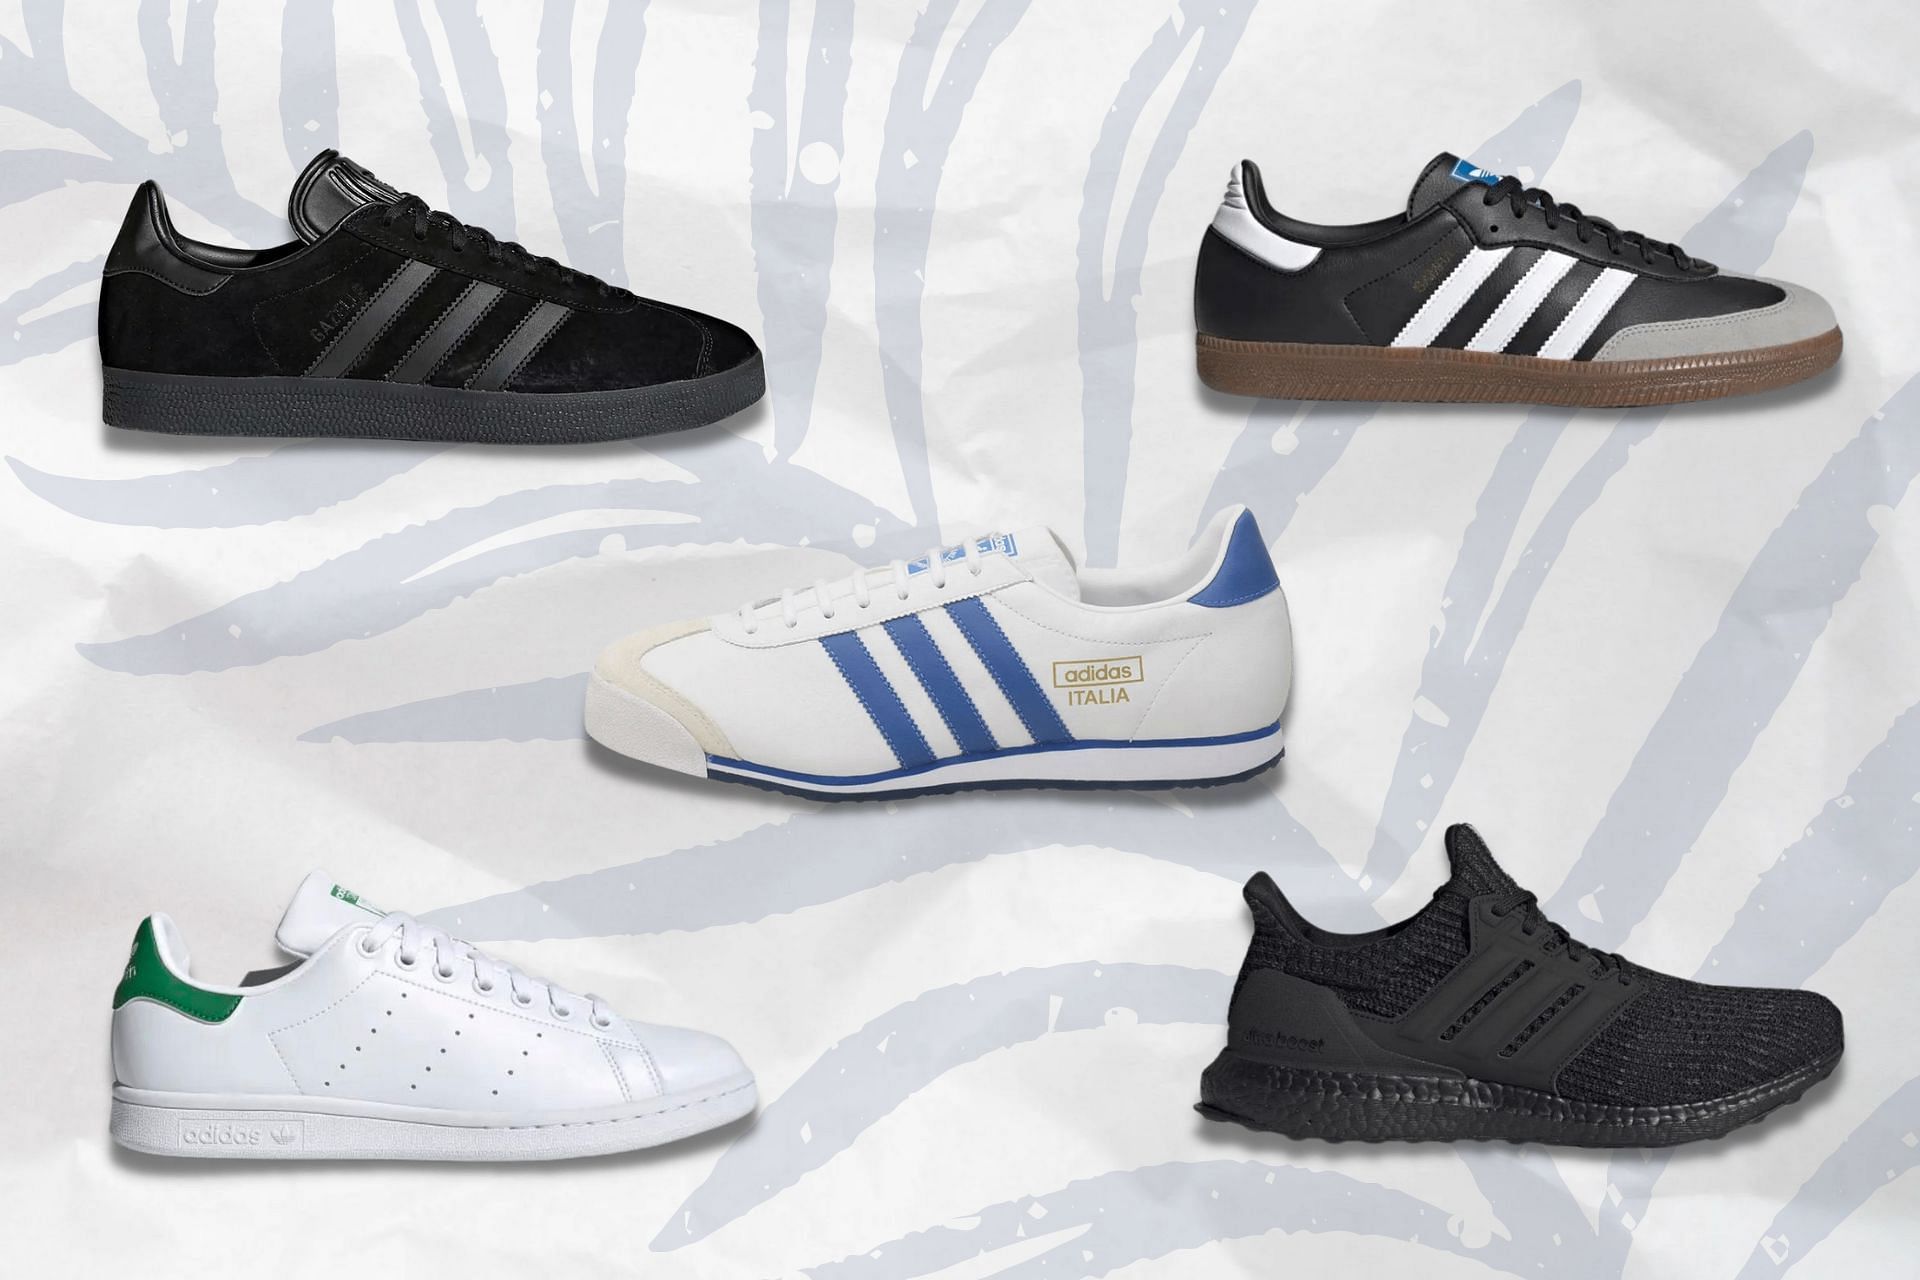 Shop the three hottest Adidas sneaker styles of 2023